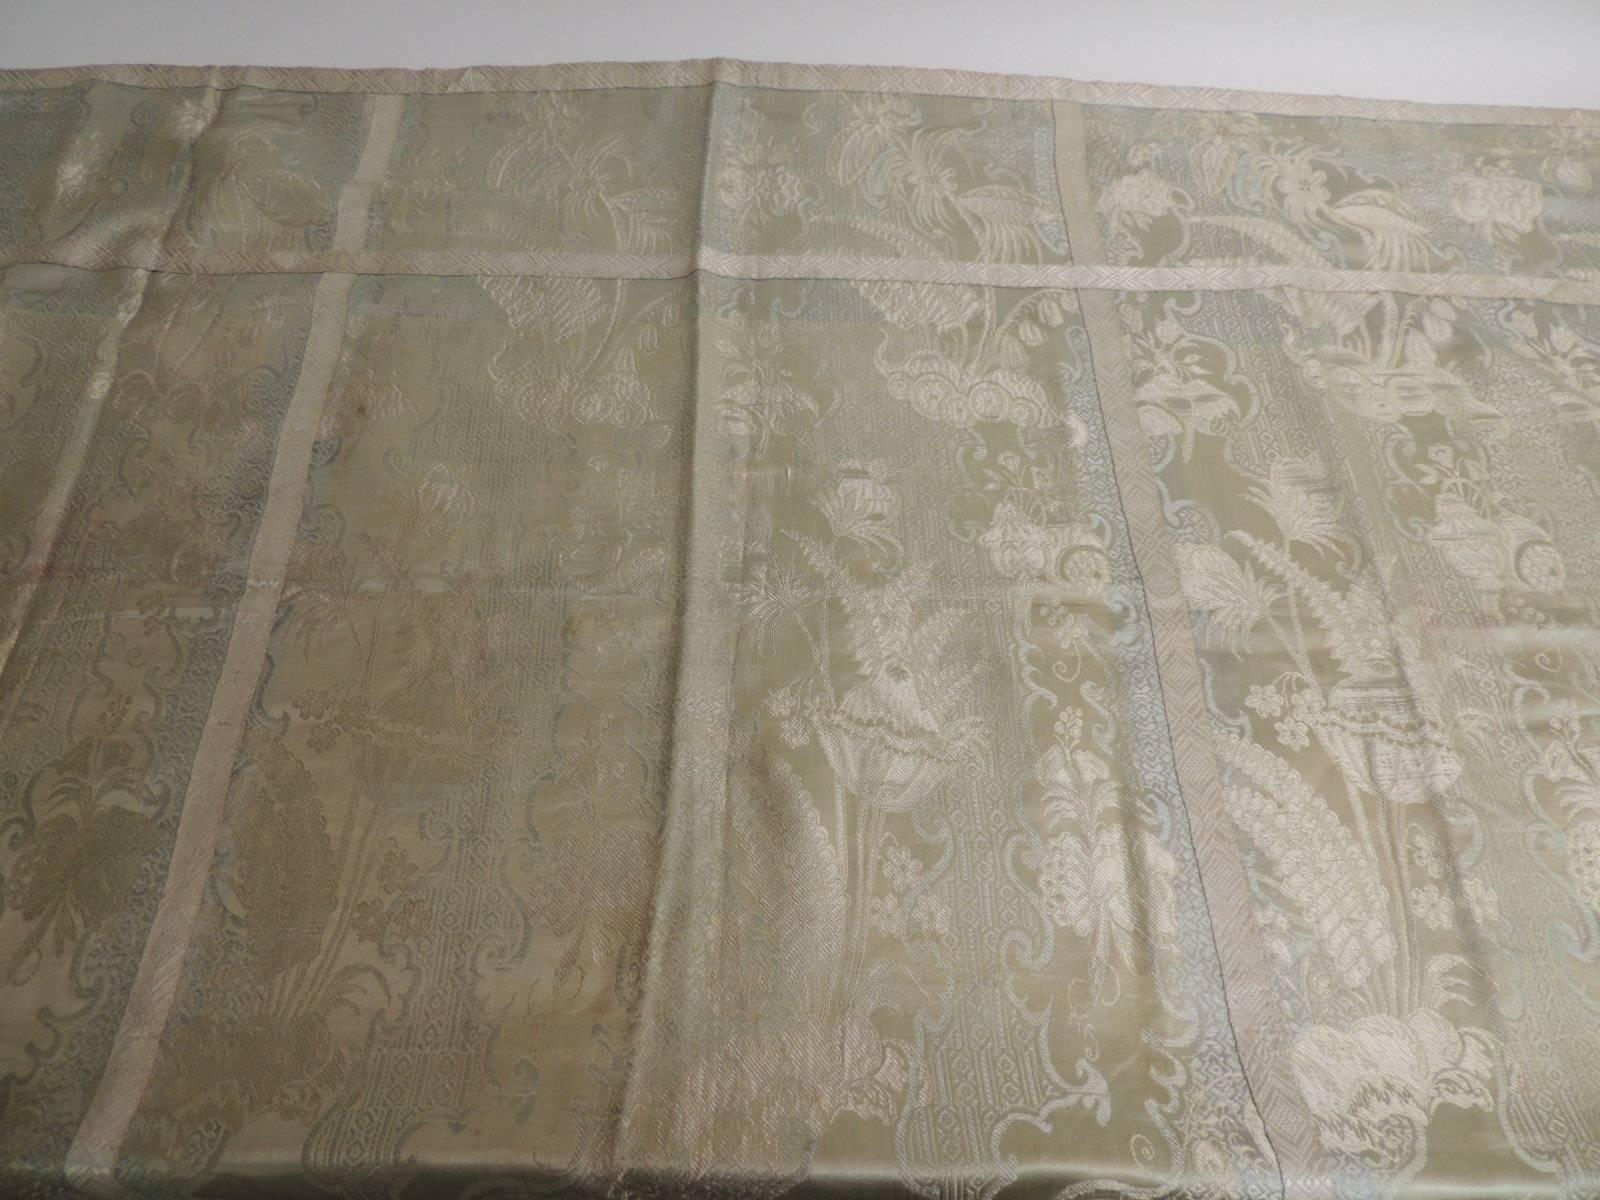 Hand-Crafted 18th Century Italian Lampas Cloth with Silver Antique Trim